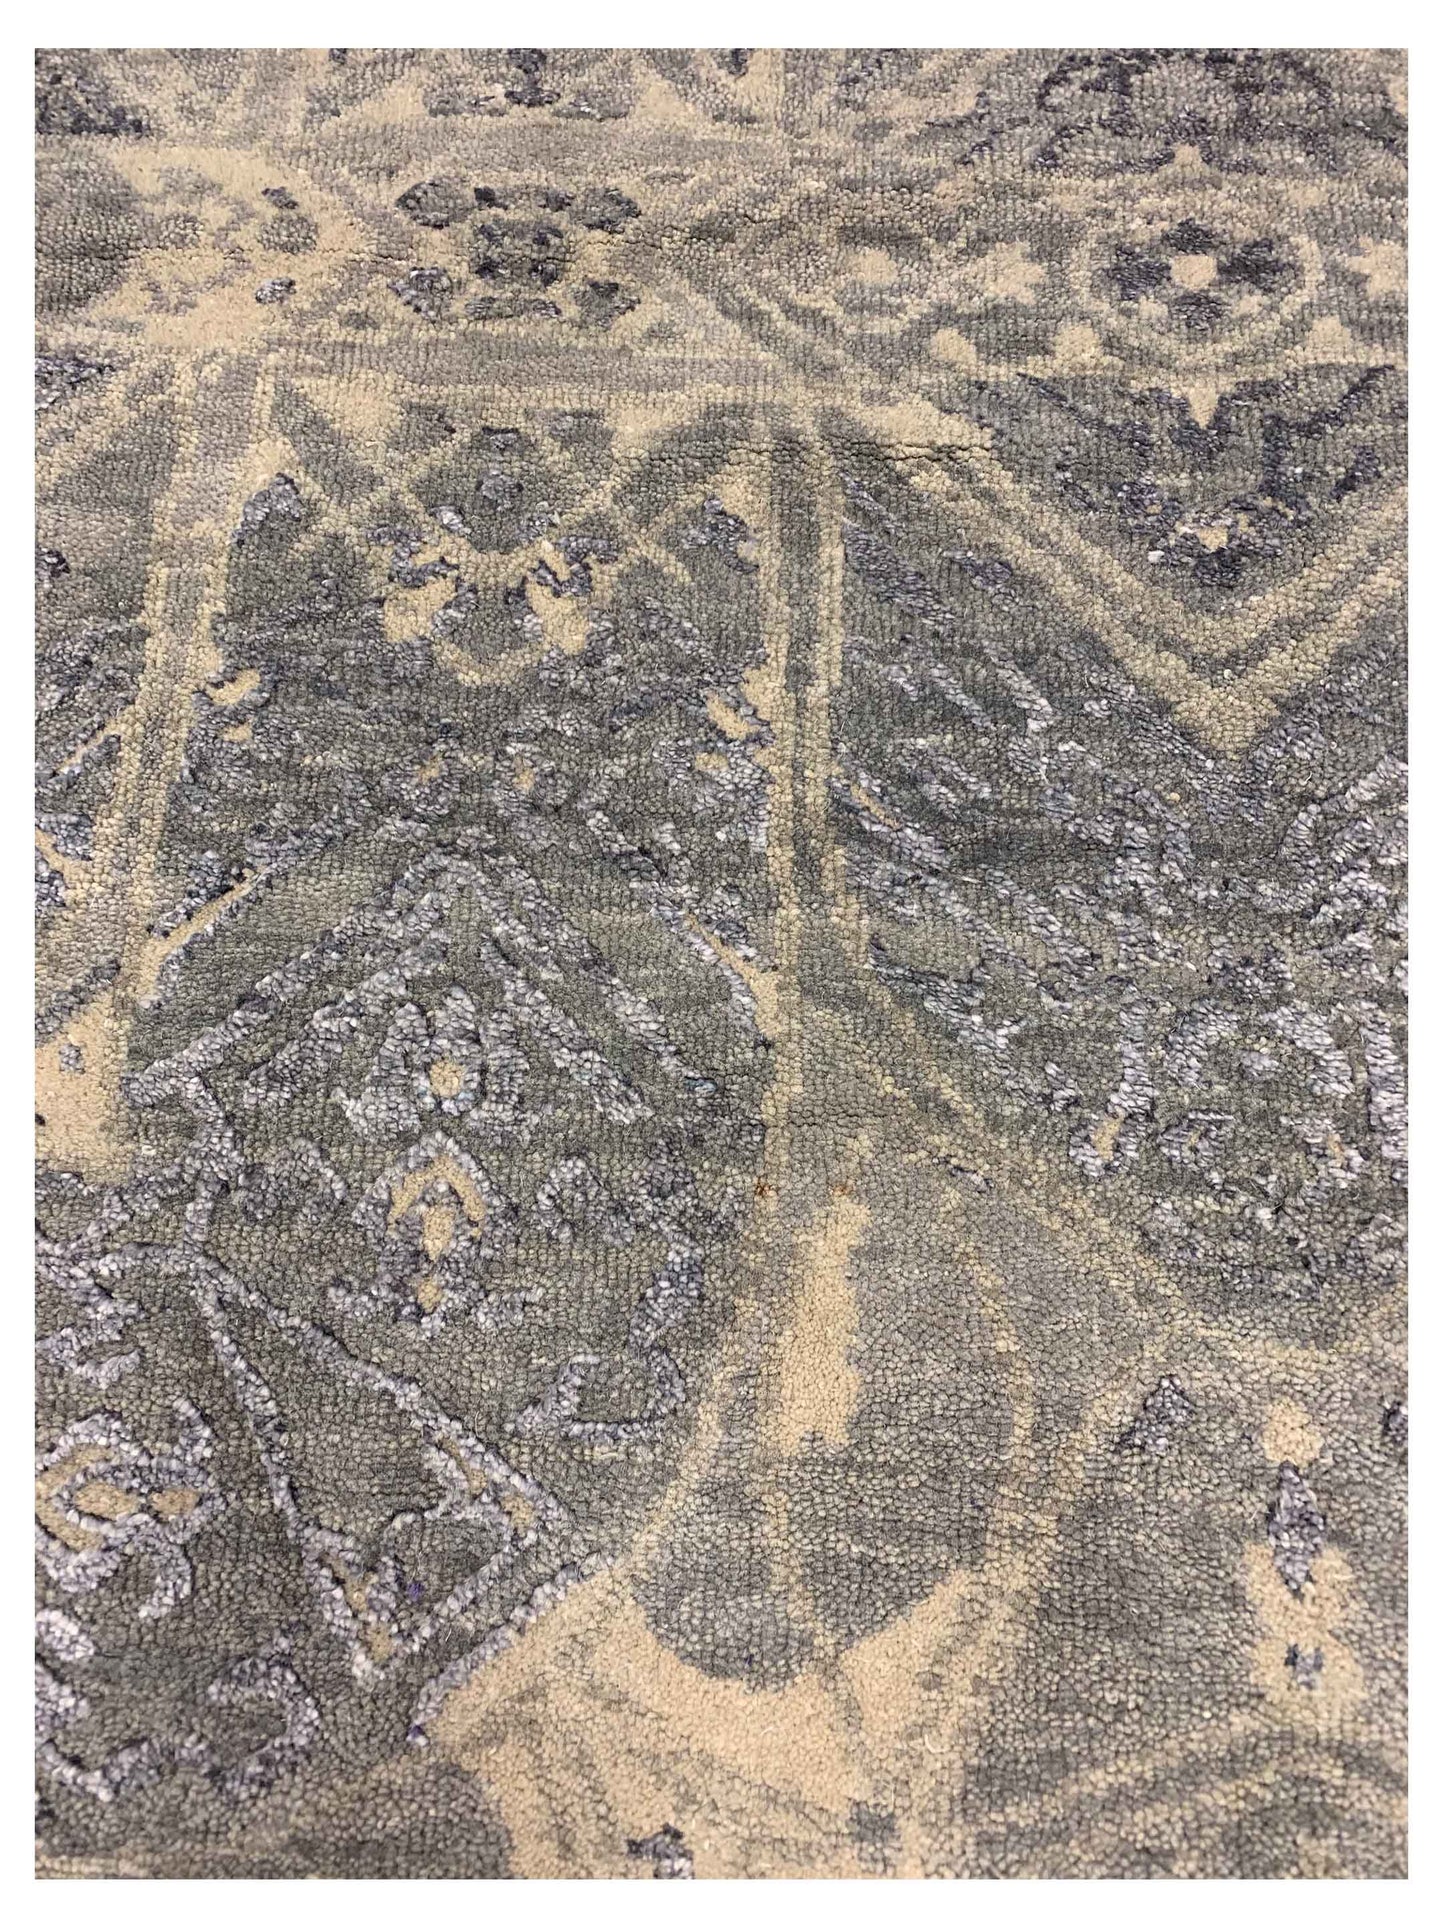 Artisan Adele  Midnight  Transitional Knotted Rug